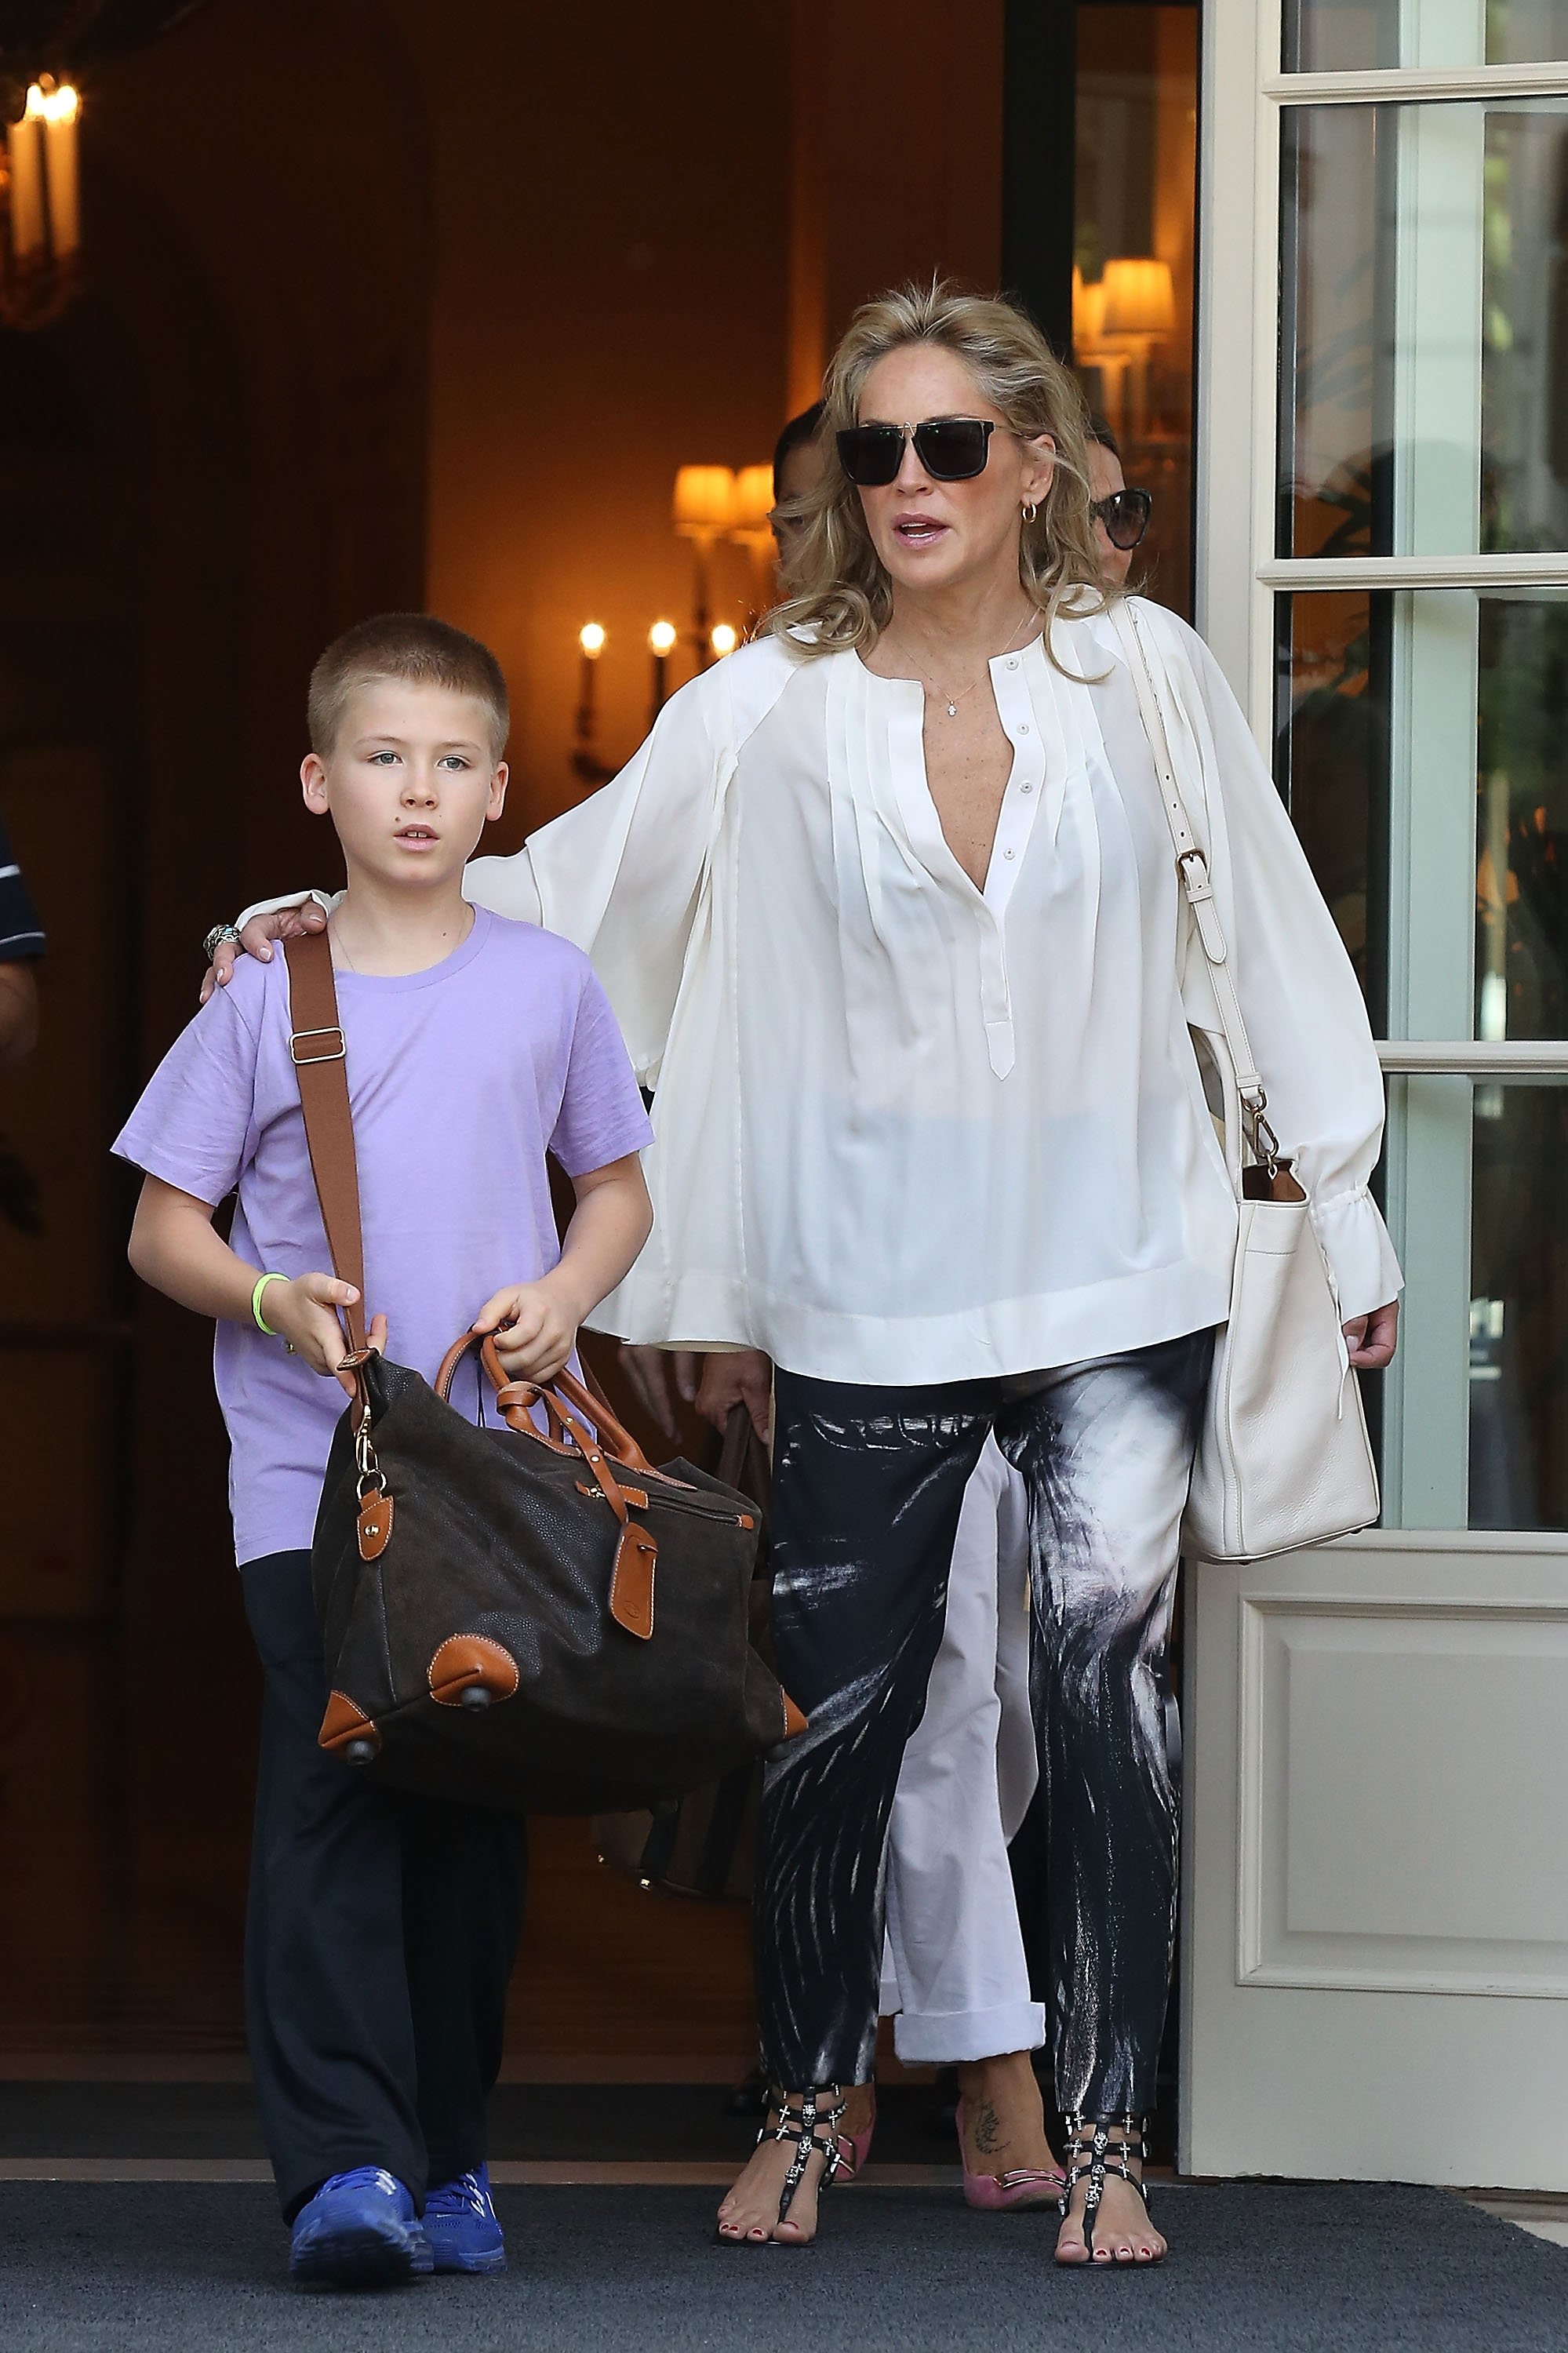 Sharon Stone and her son Roan Bronstein seen leaving her hotel on July 5, 2013, in Paris, France. | Source: Marc Piasecki/FilmMagic/Getty Images